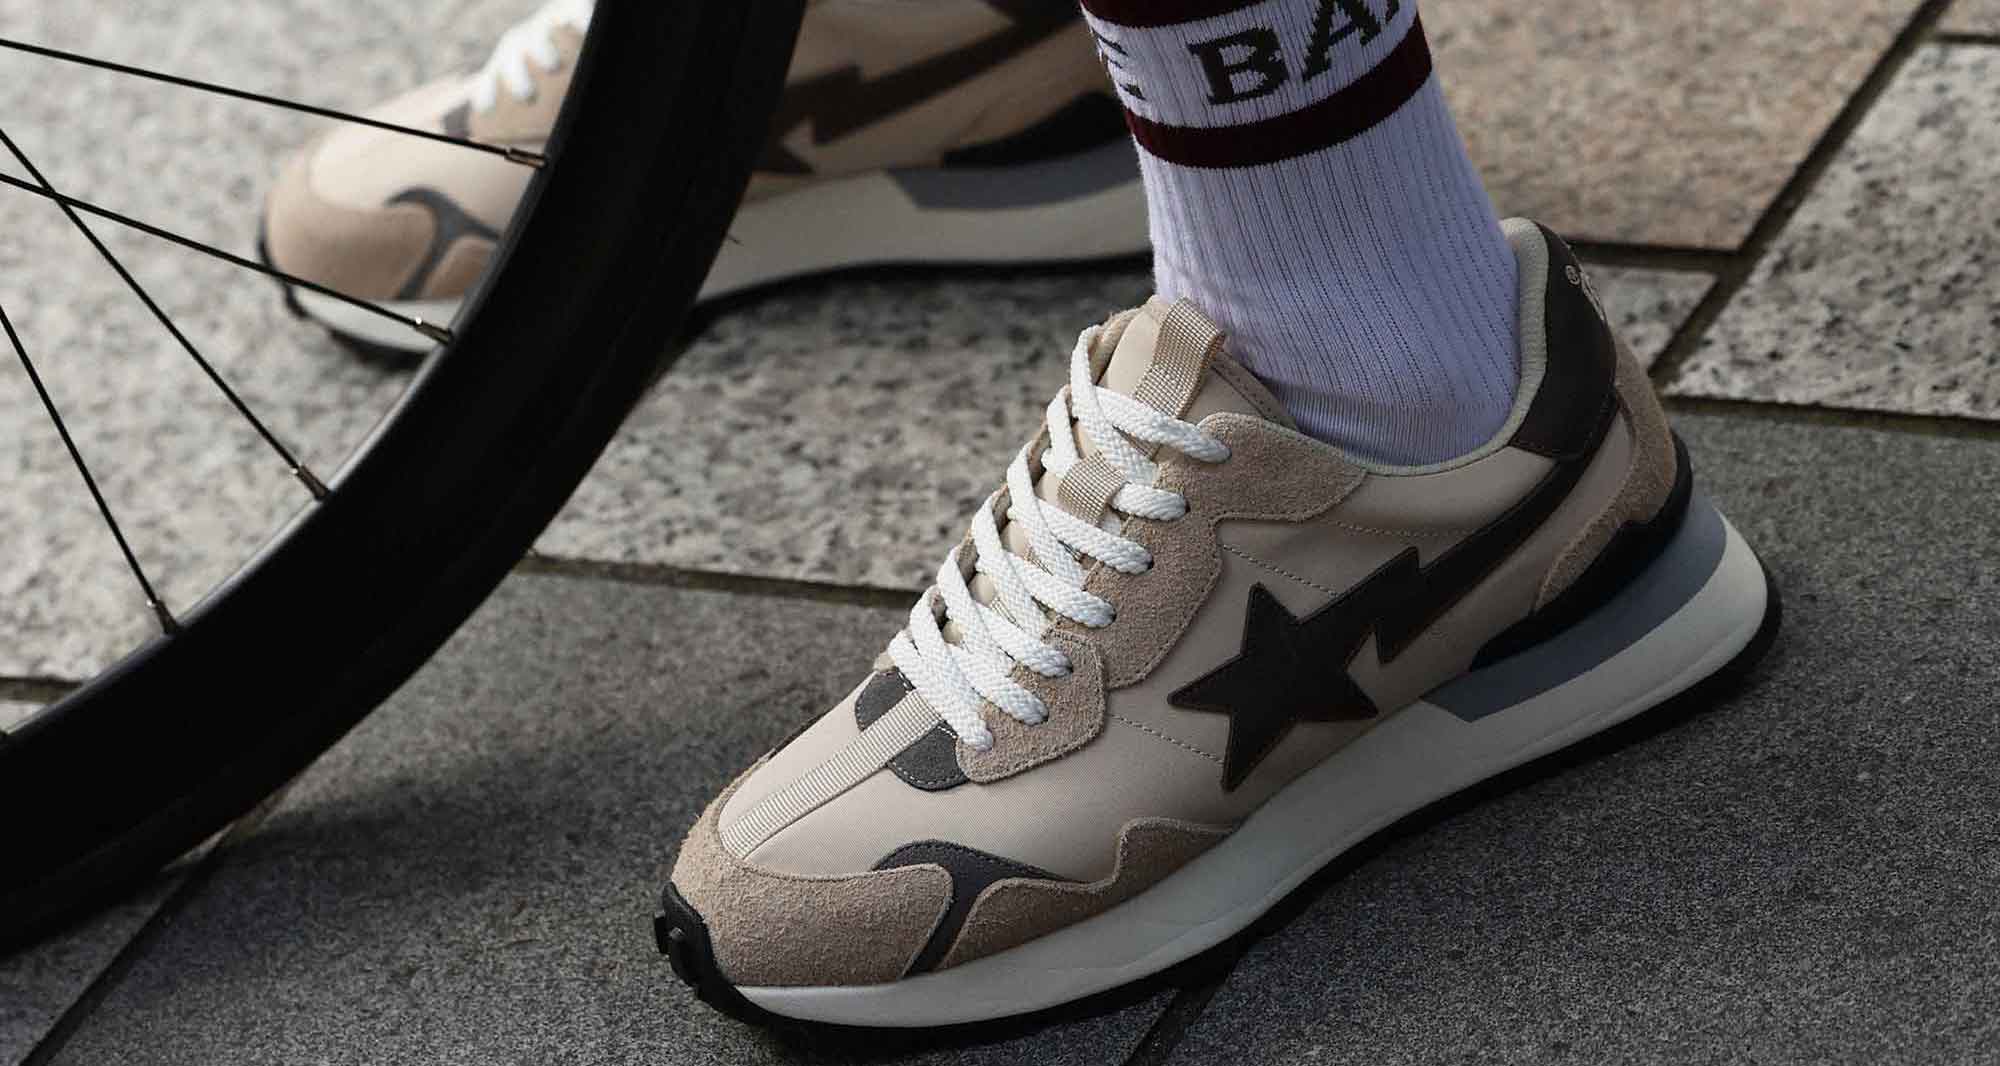 BAPE’s Road Sta Express “Beige/Black” Is a Summer Must-Have